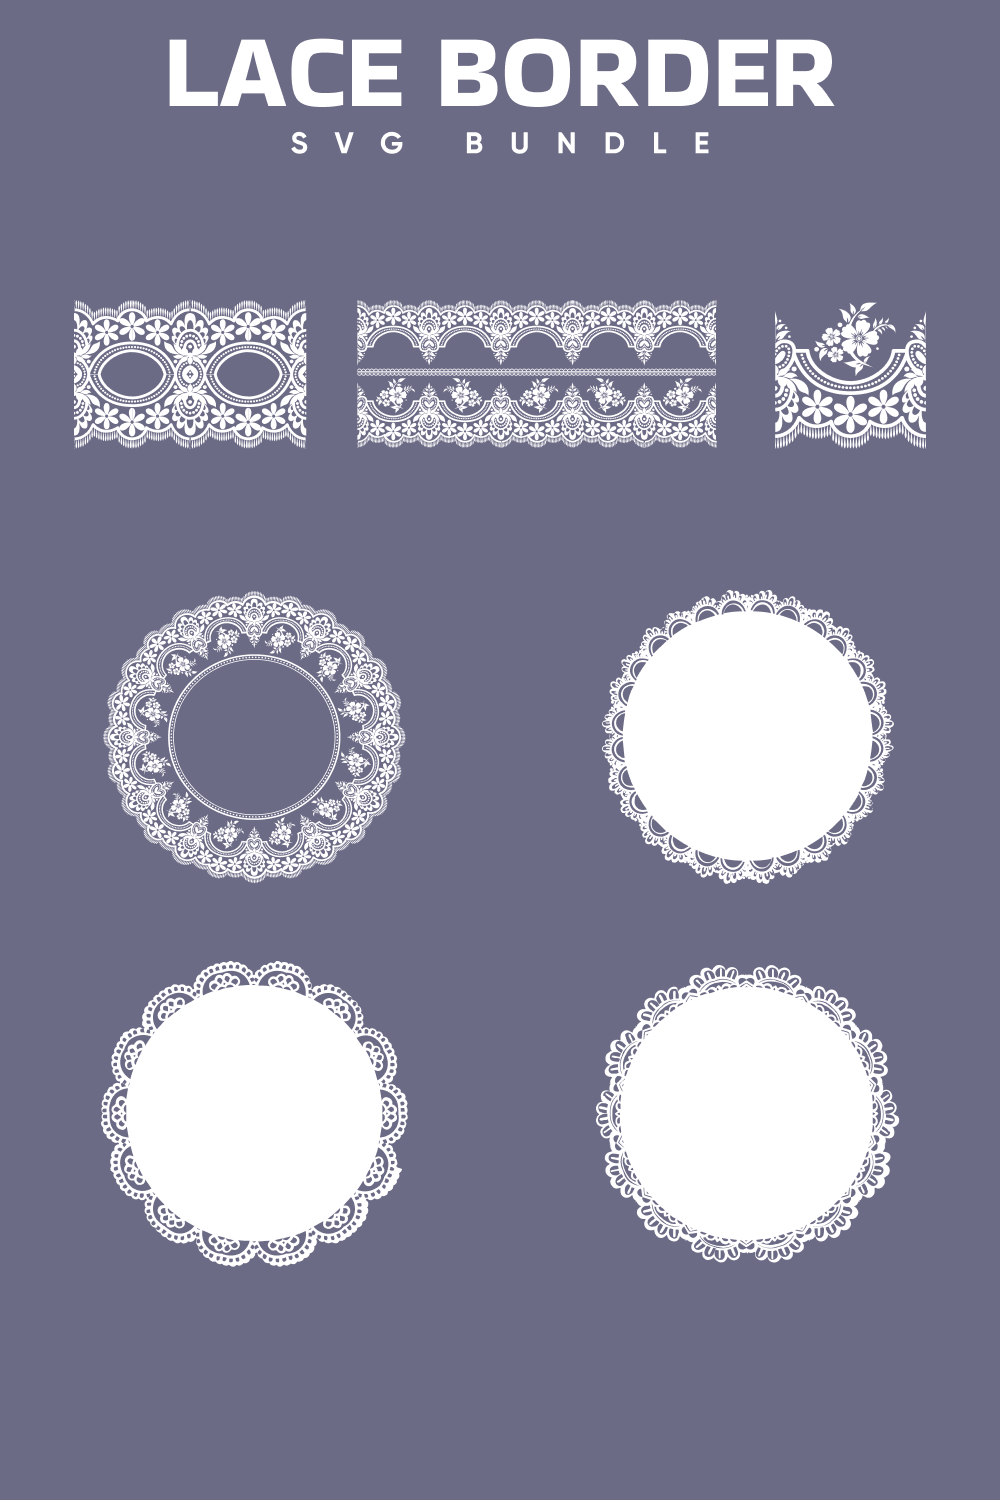 Lace borders with minimalistic ornaments.